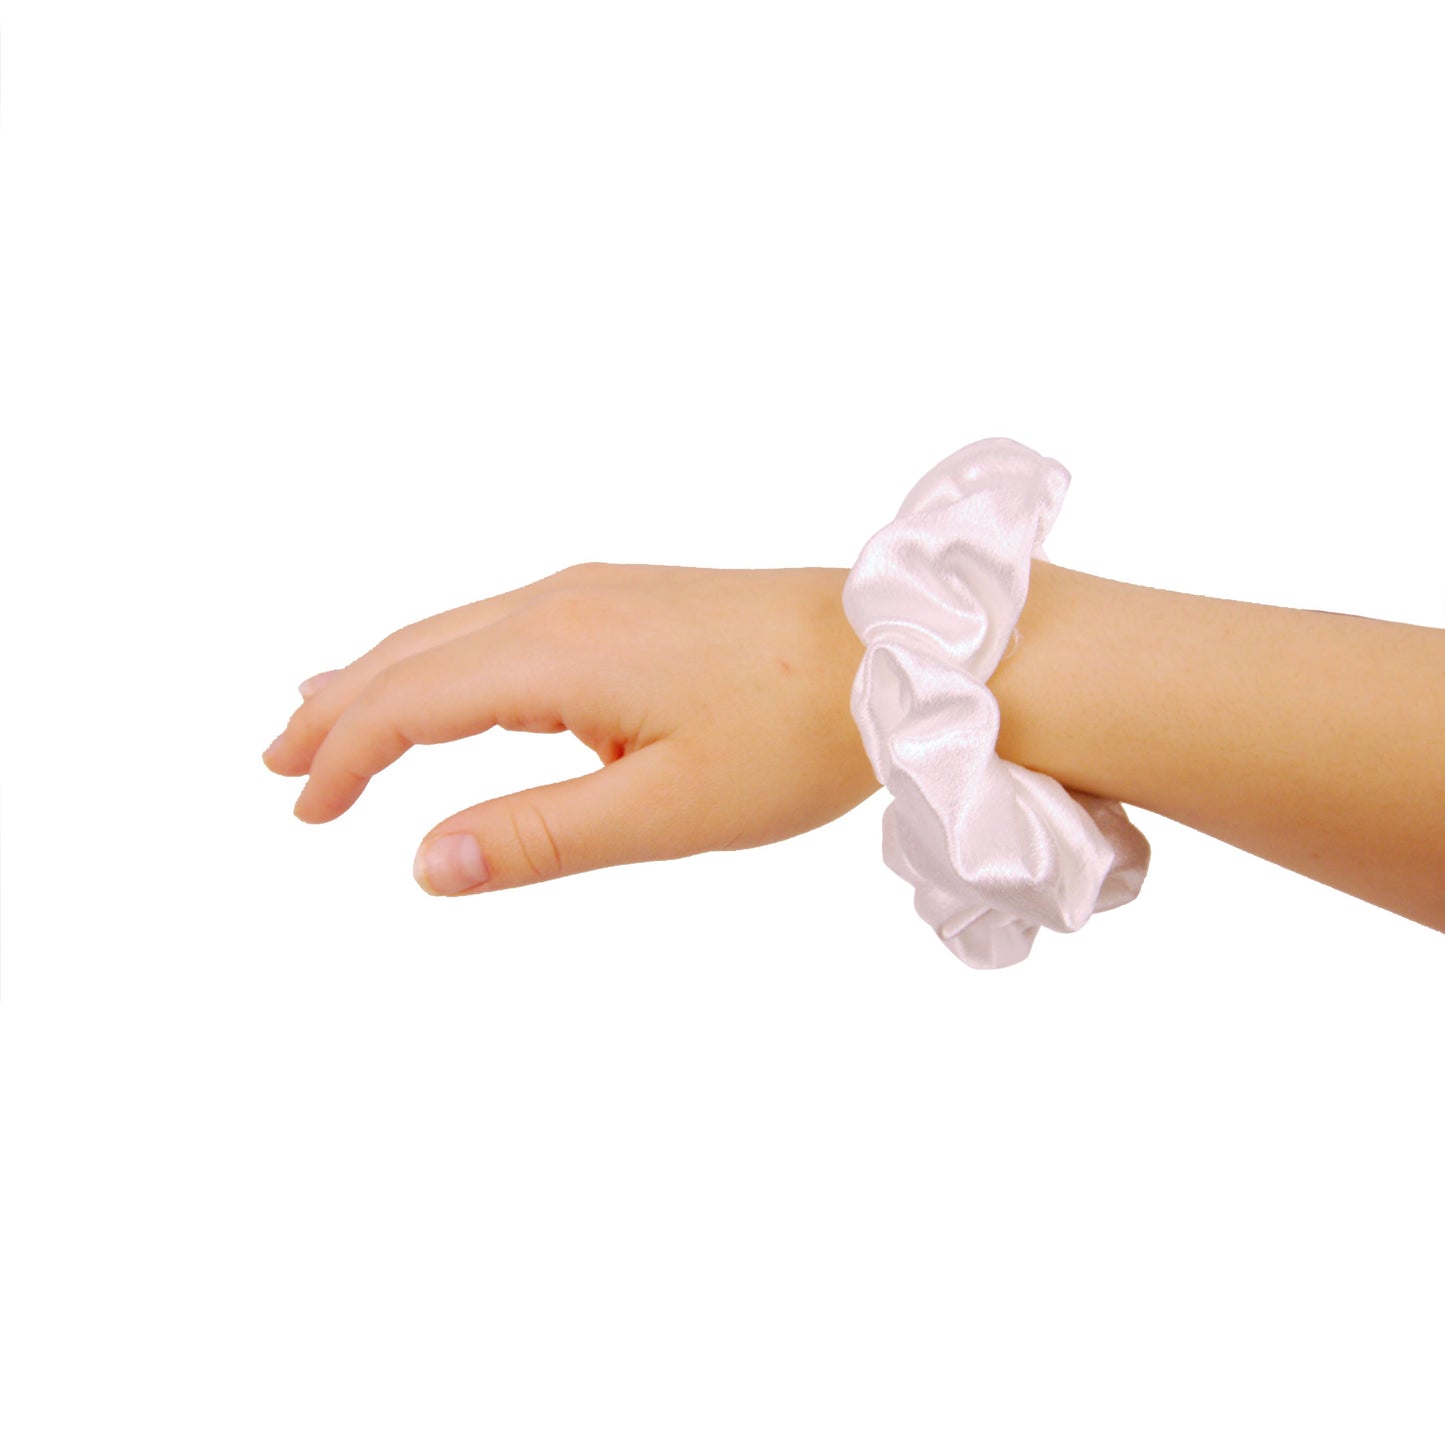 Amelia Beauty, White Imitation Silk Scrunchies, 4.5in Diameter, Gentle on Hair, Strong Hold, No Snag, No Dents or Creases. 6 Pack